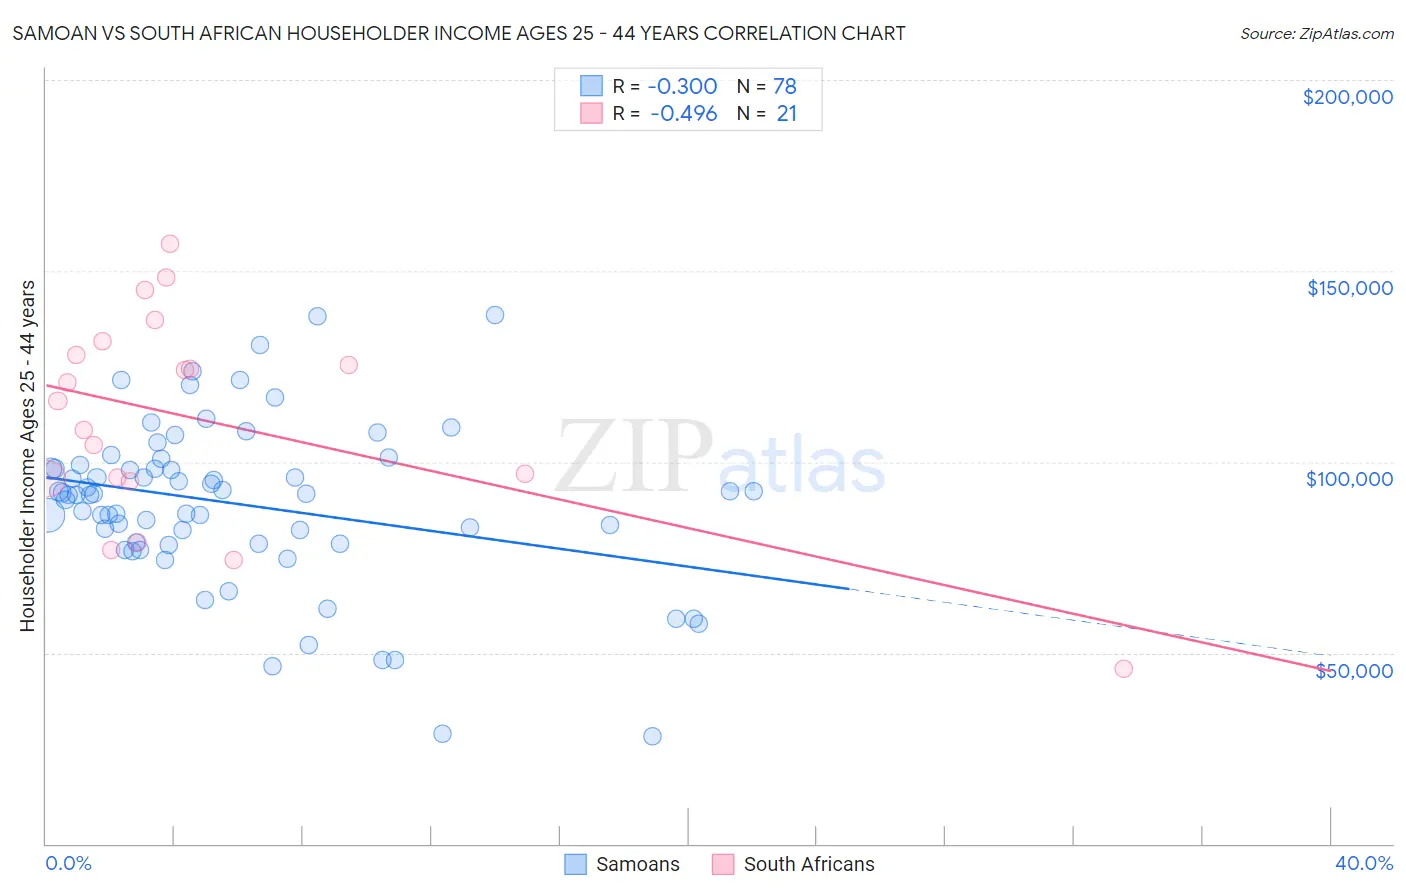 Samoan vs South African Householder Income Ages 25 - 44 years